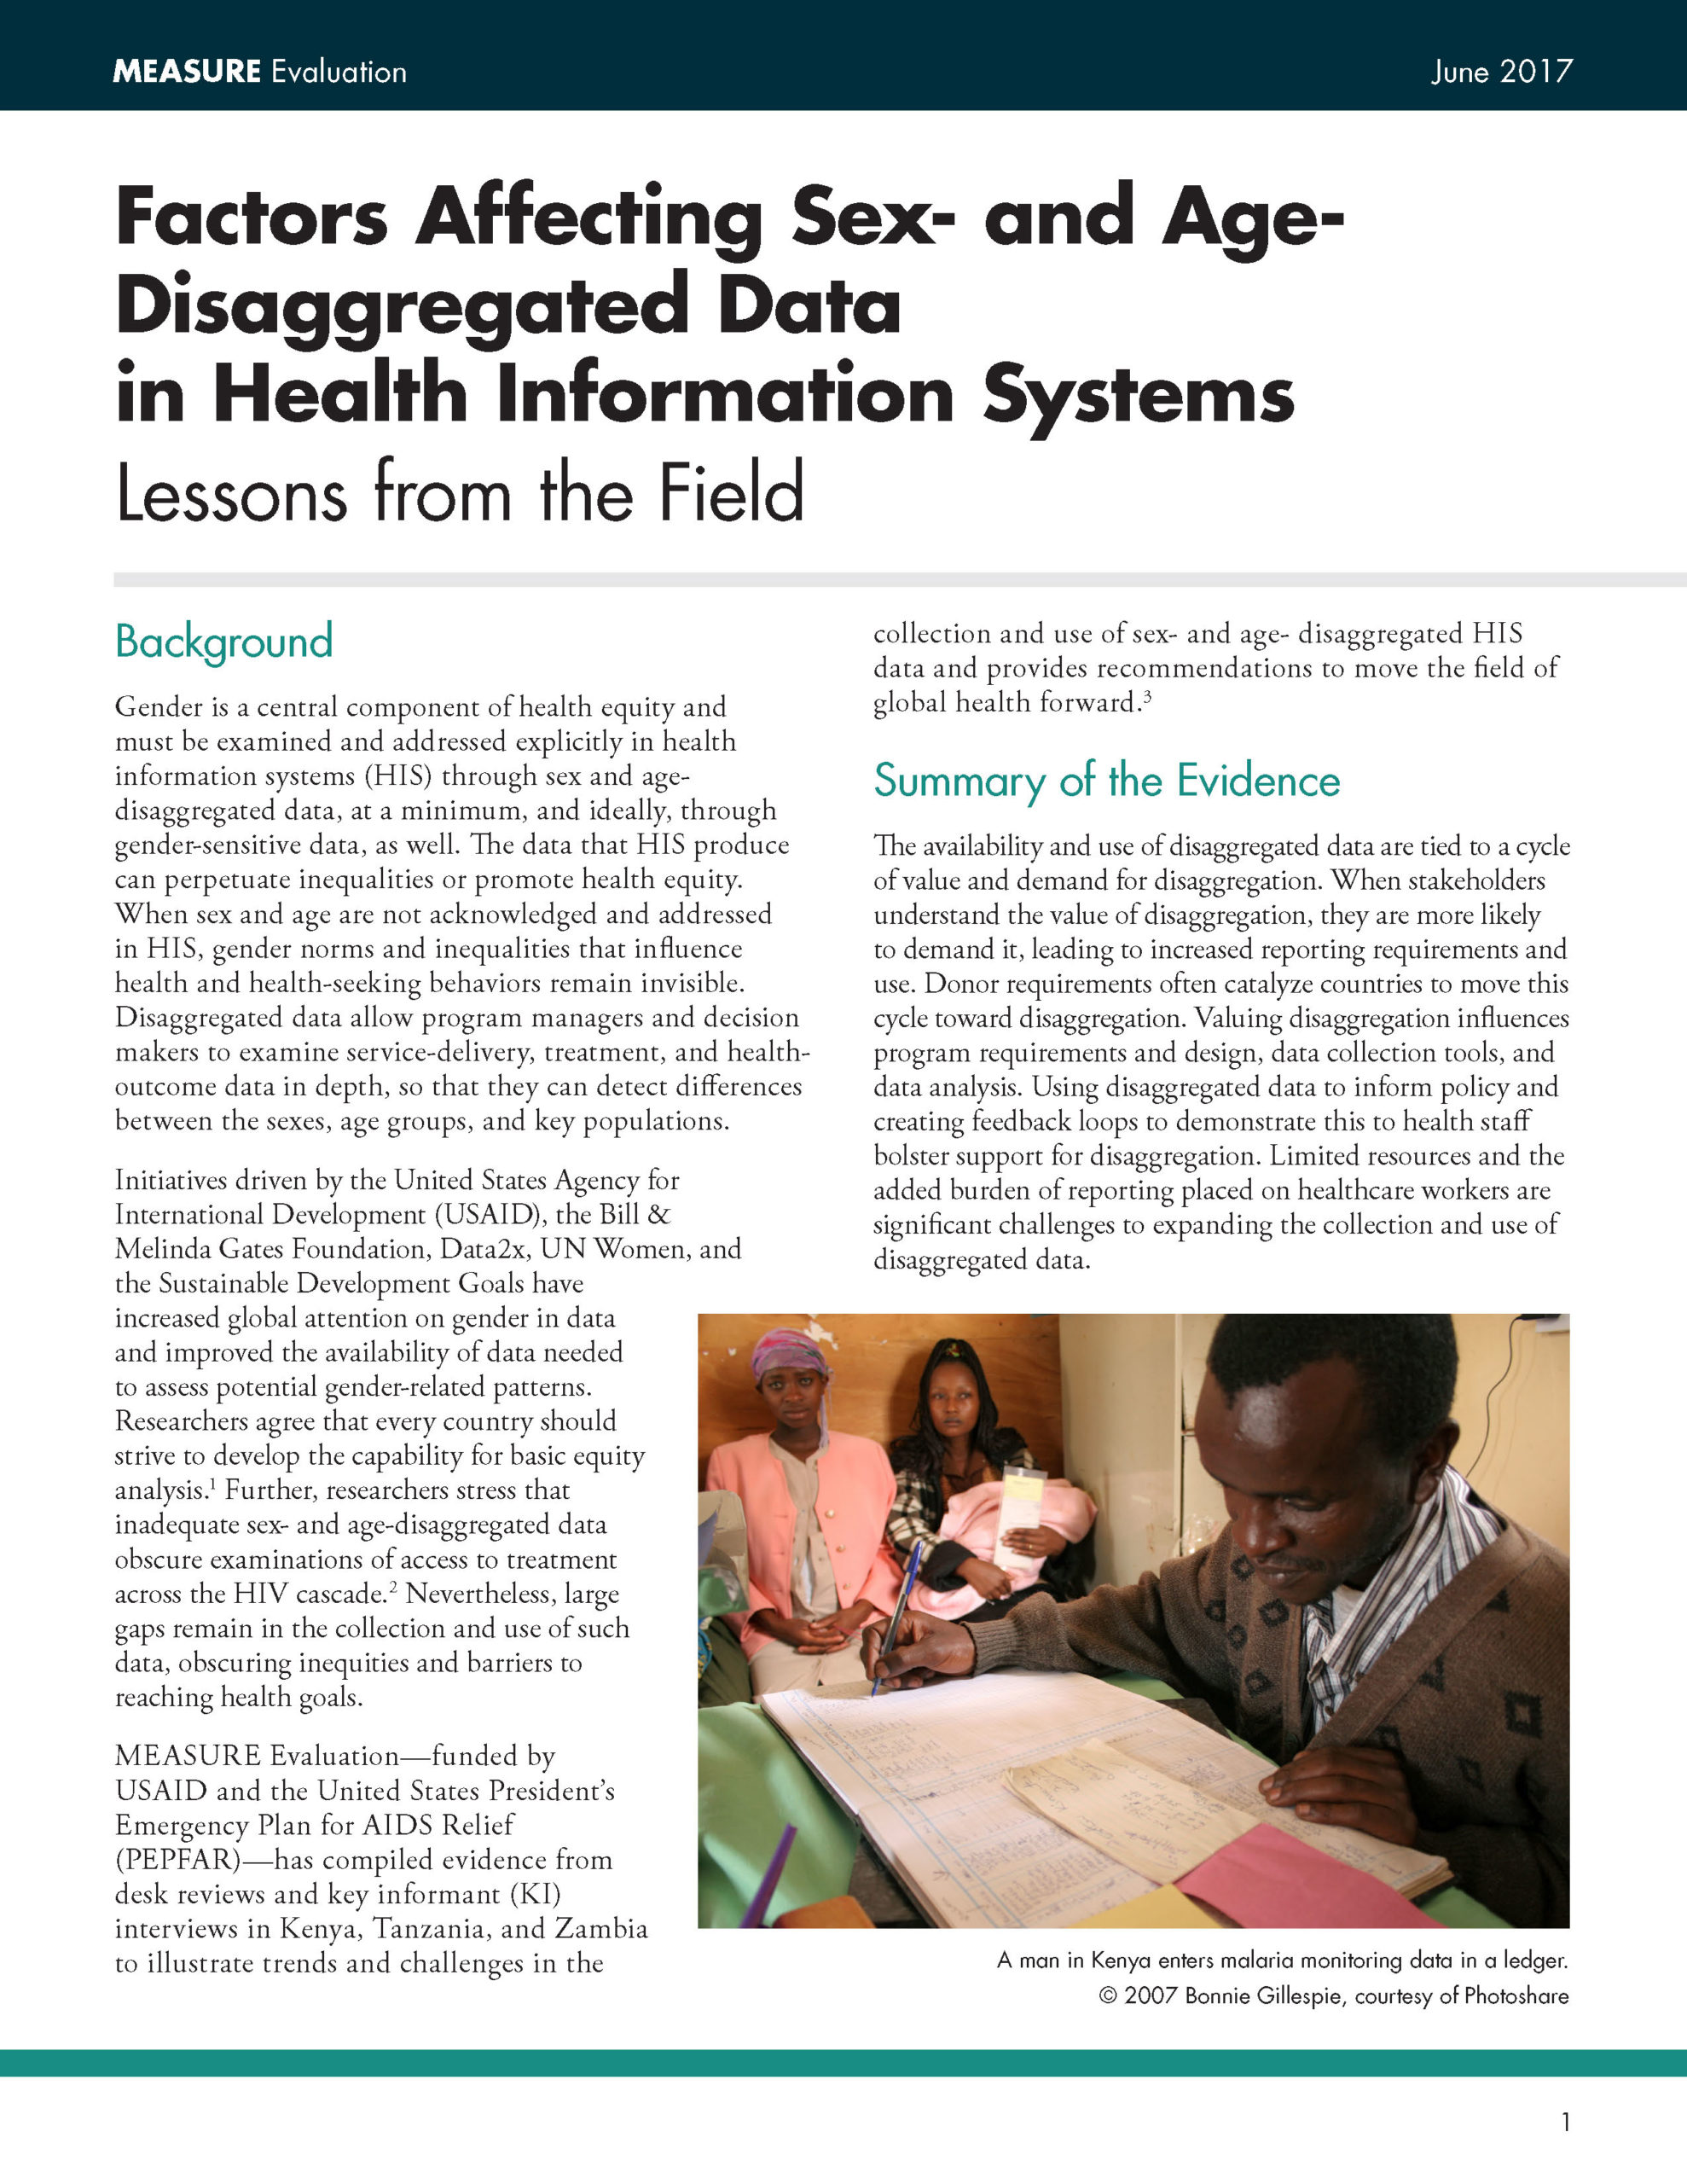 Factors Affecting Sex- and Age-Disaggregated Data in Health Information System: Lessons from the Field